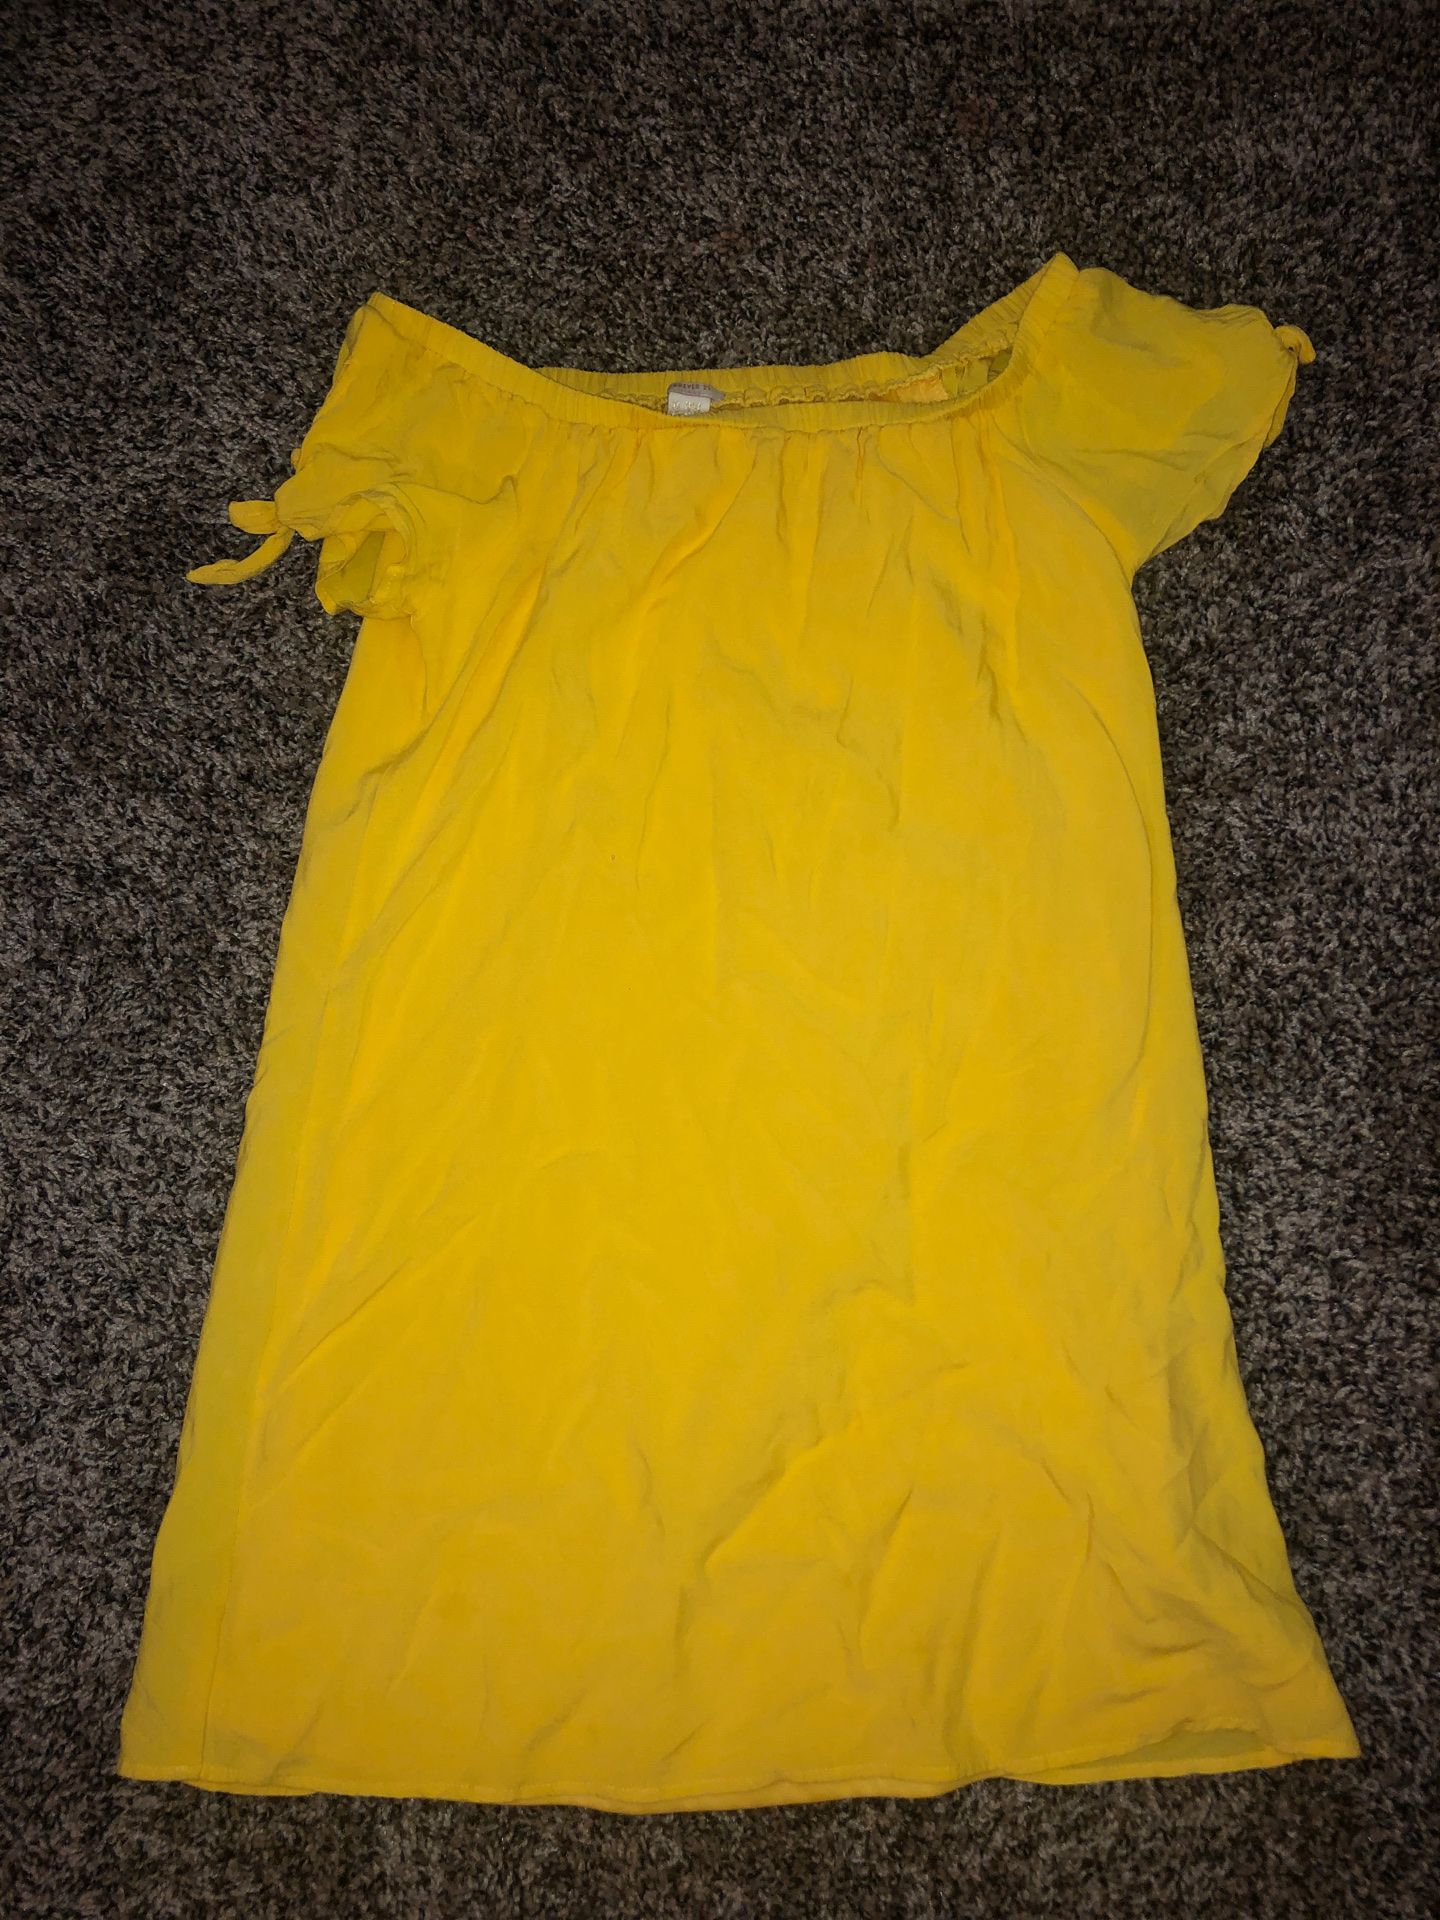 Forever 21 girls off the shoulder yellow sun dress